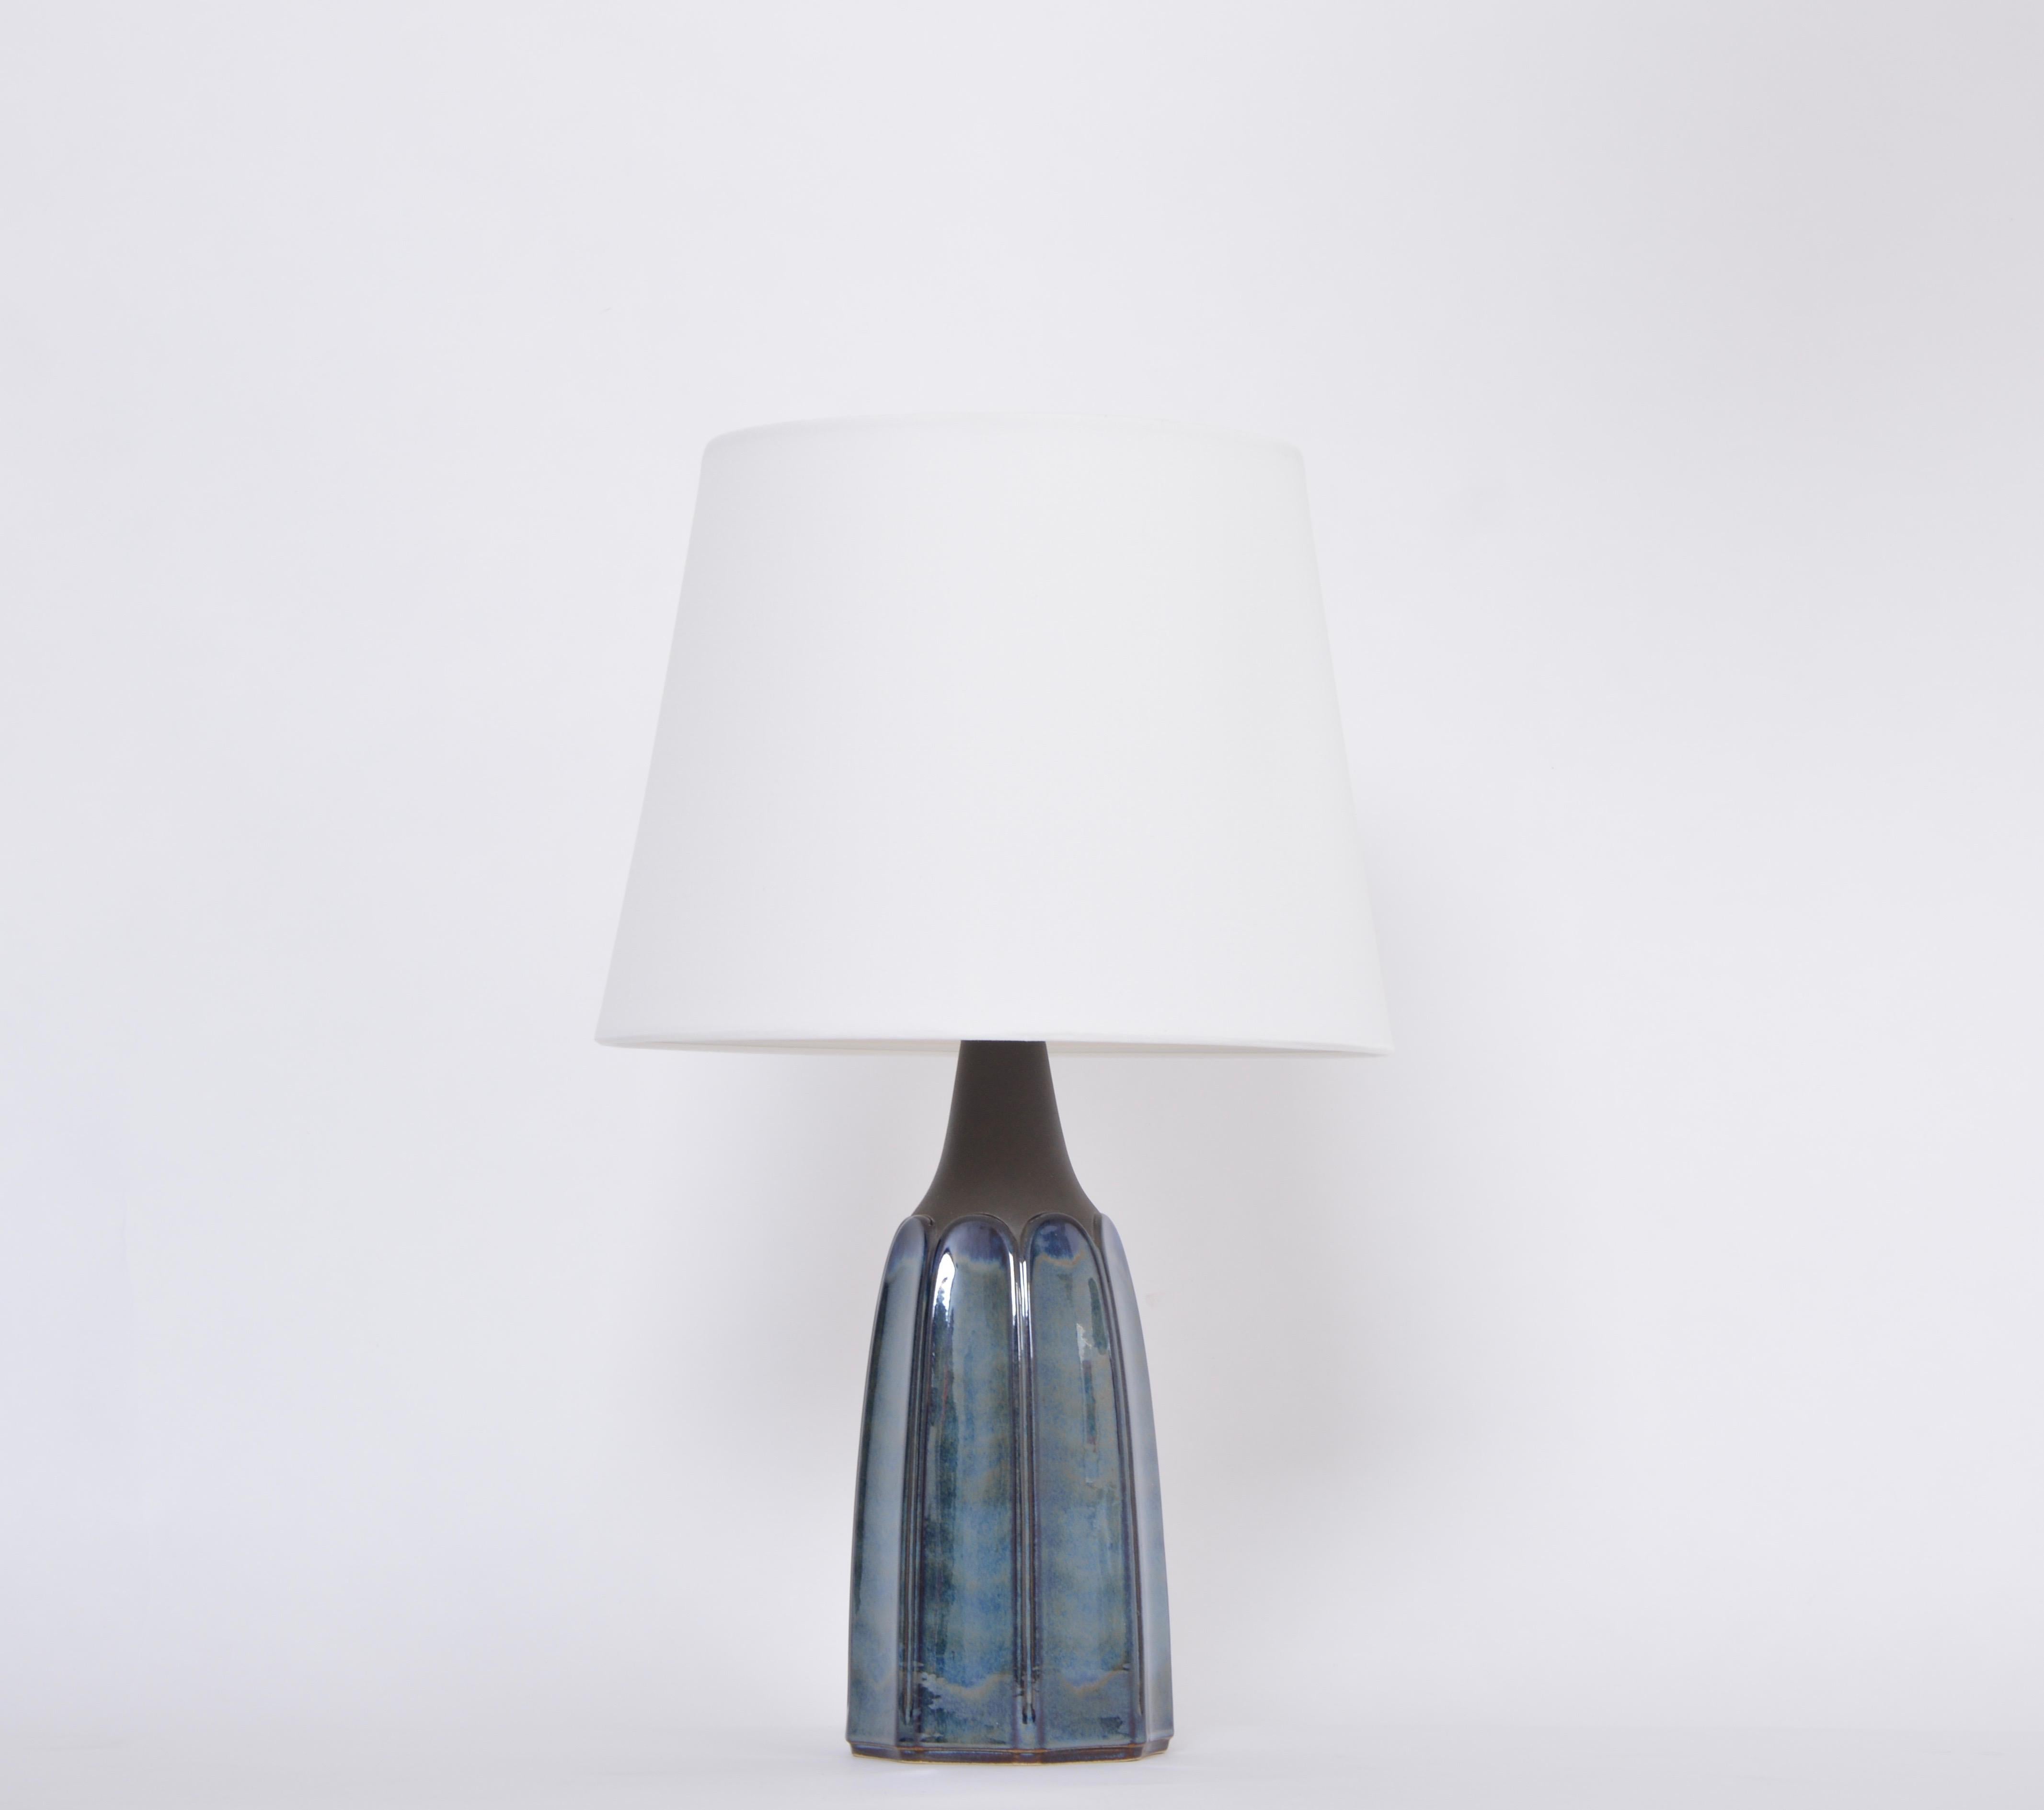 Tall Blue Stoneware Table Lamp Model 1042 by Einar Johansen for Søholm

Table lamp made of stoneware with blue ceramic glazing to the base of the lamp. Designed by Einar Johansen and produced by Danish company Soholm. The lamp has been rewired for